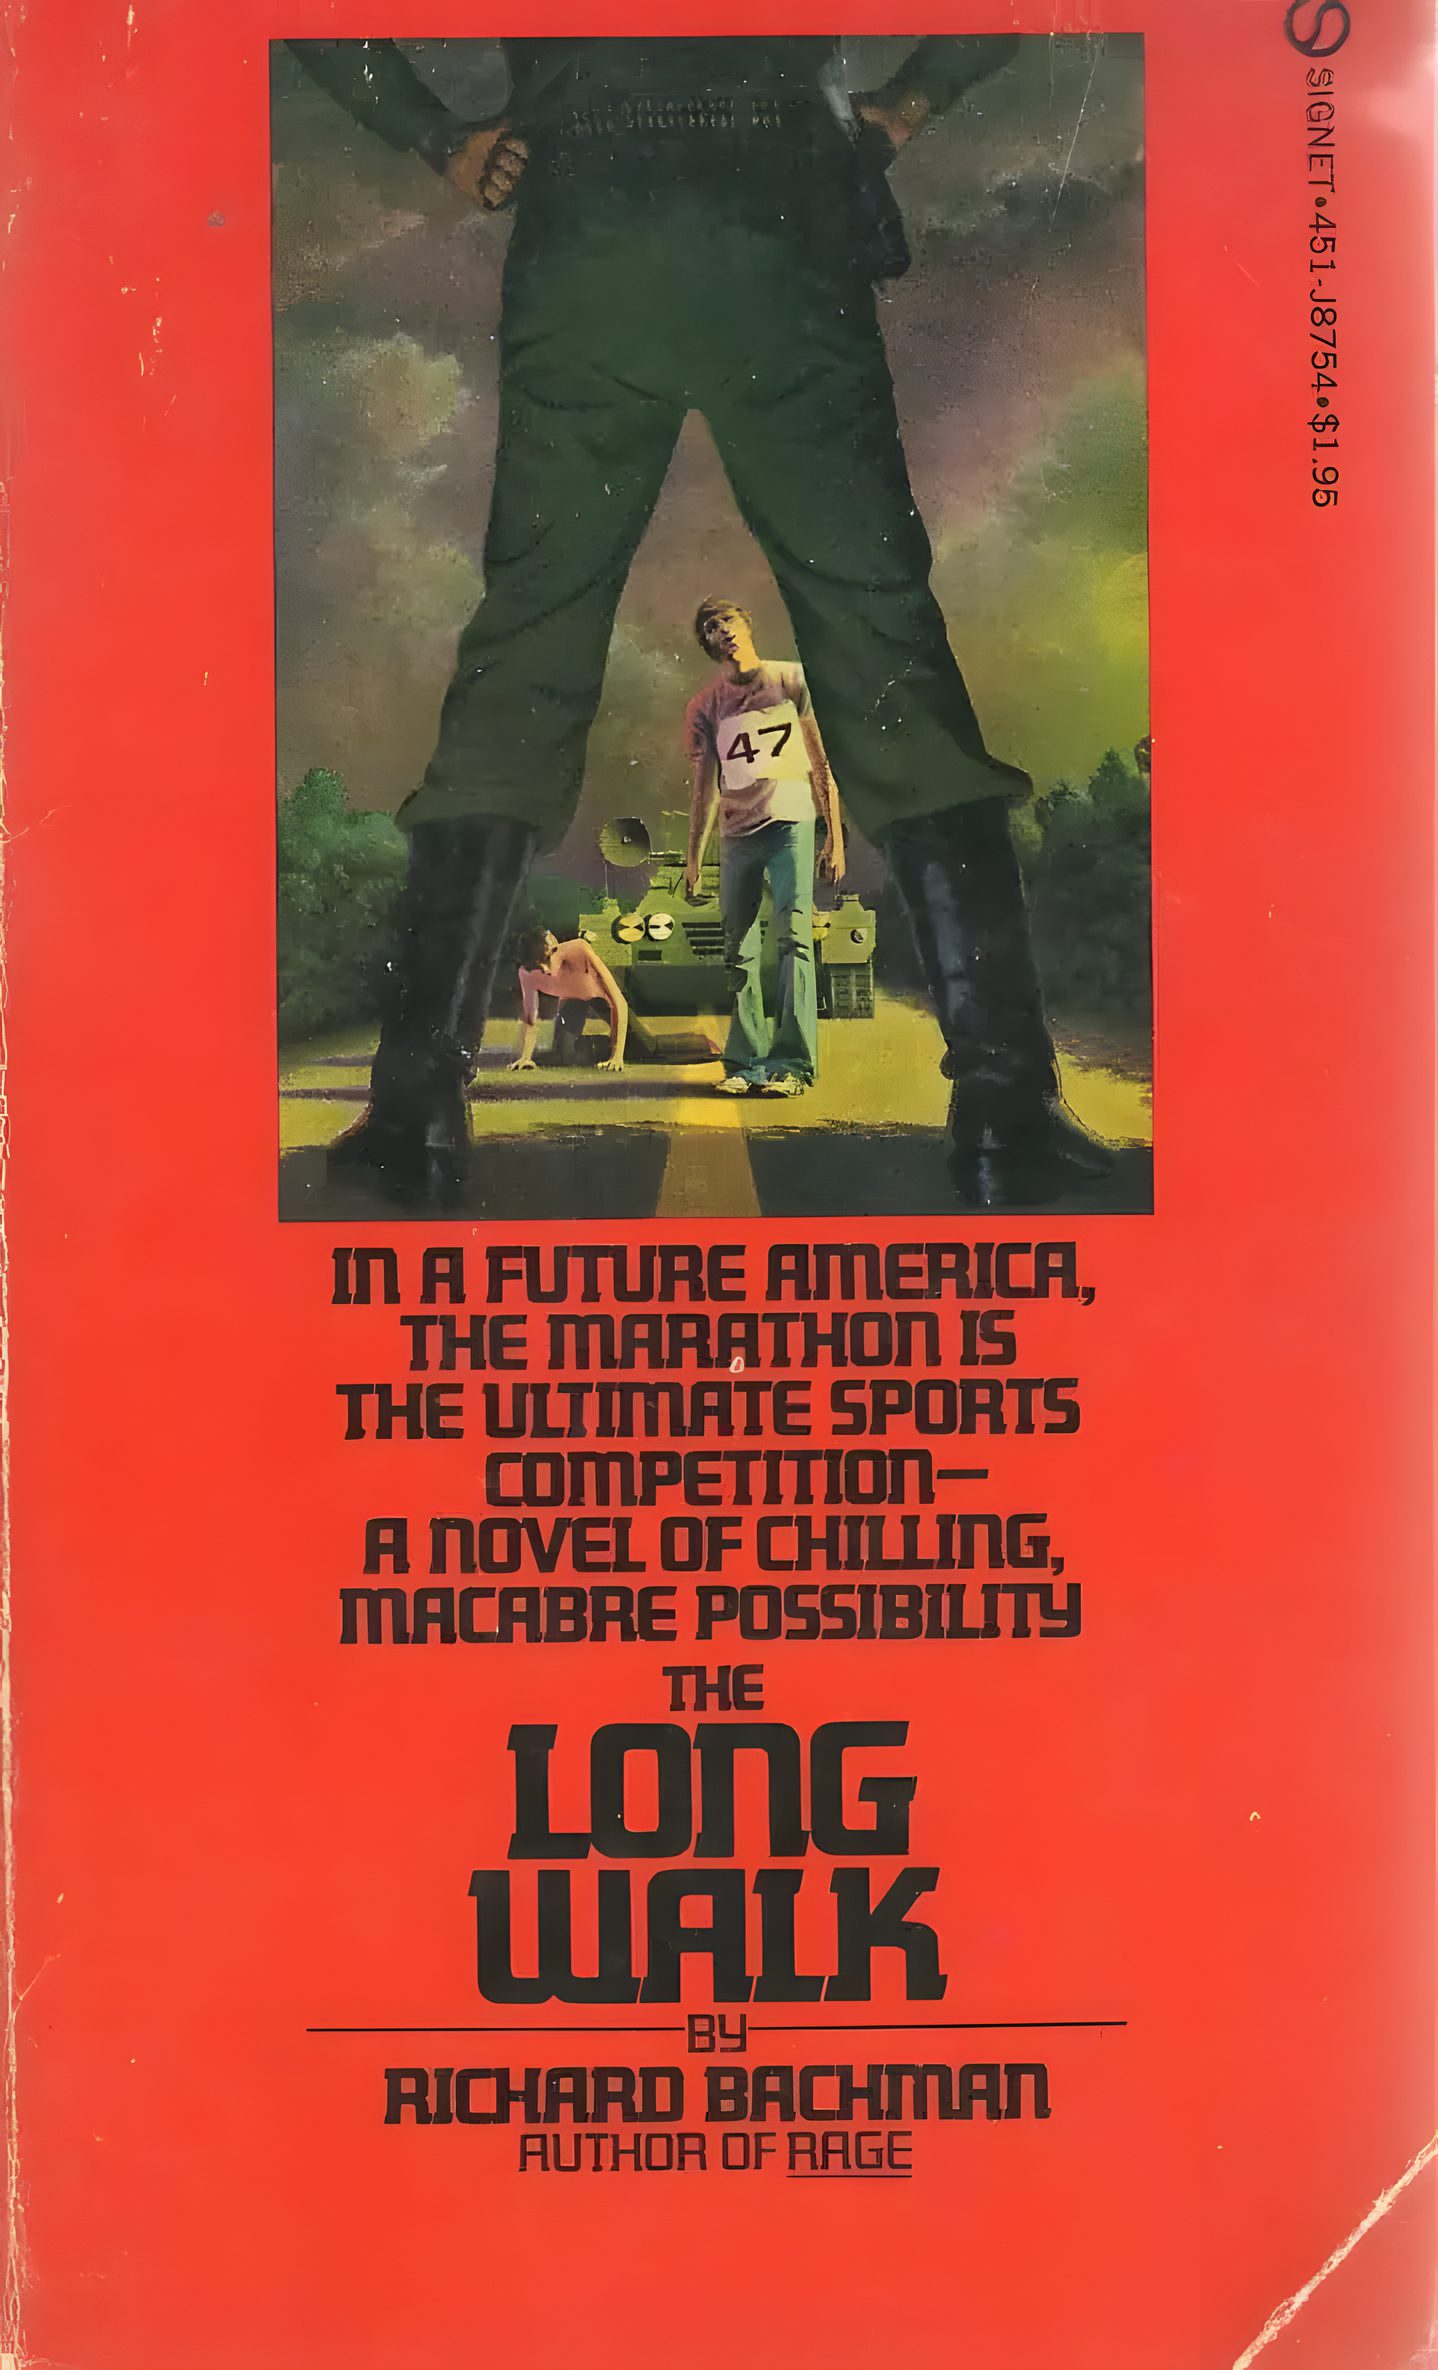 The Long Walk Poster